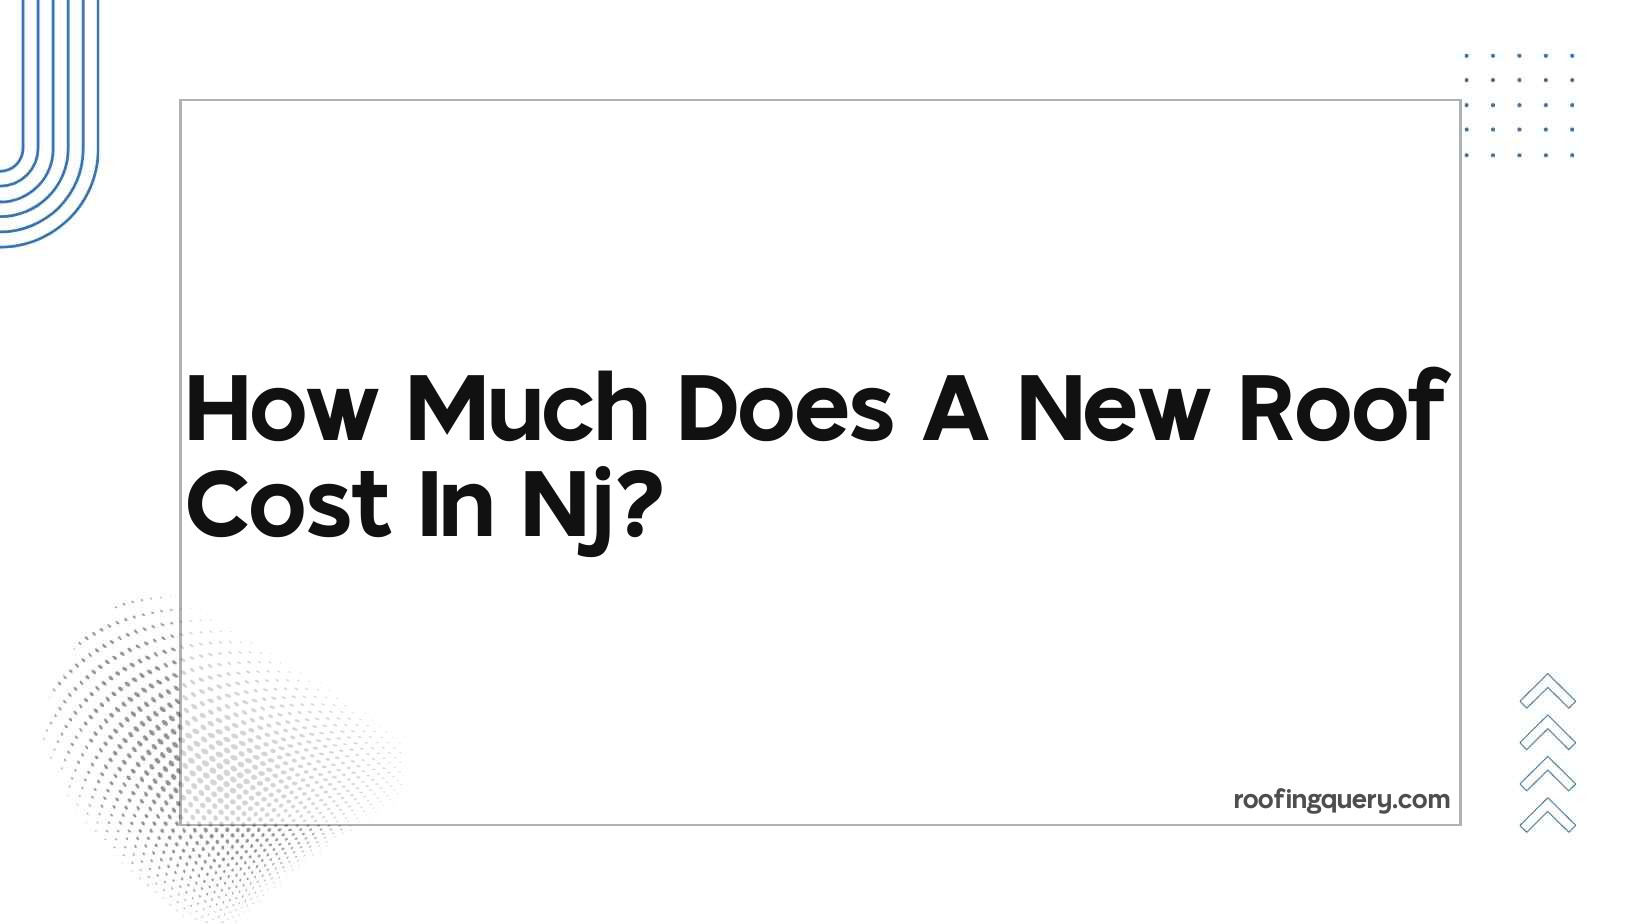 How Much Does A New Roof Cost In Nj?